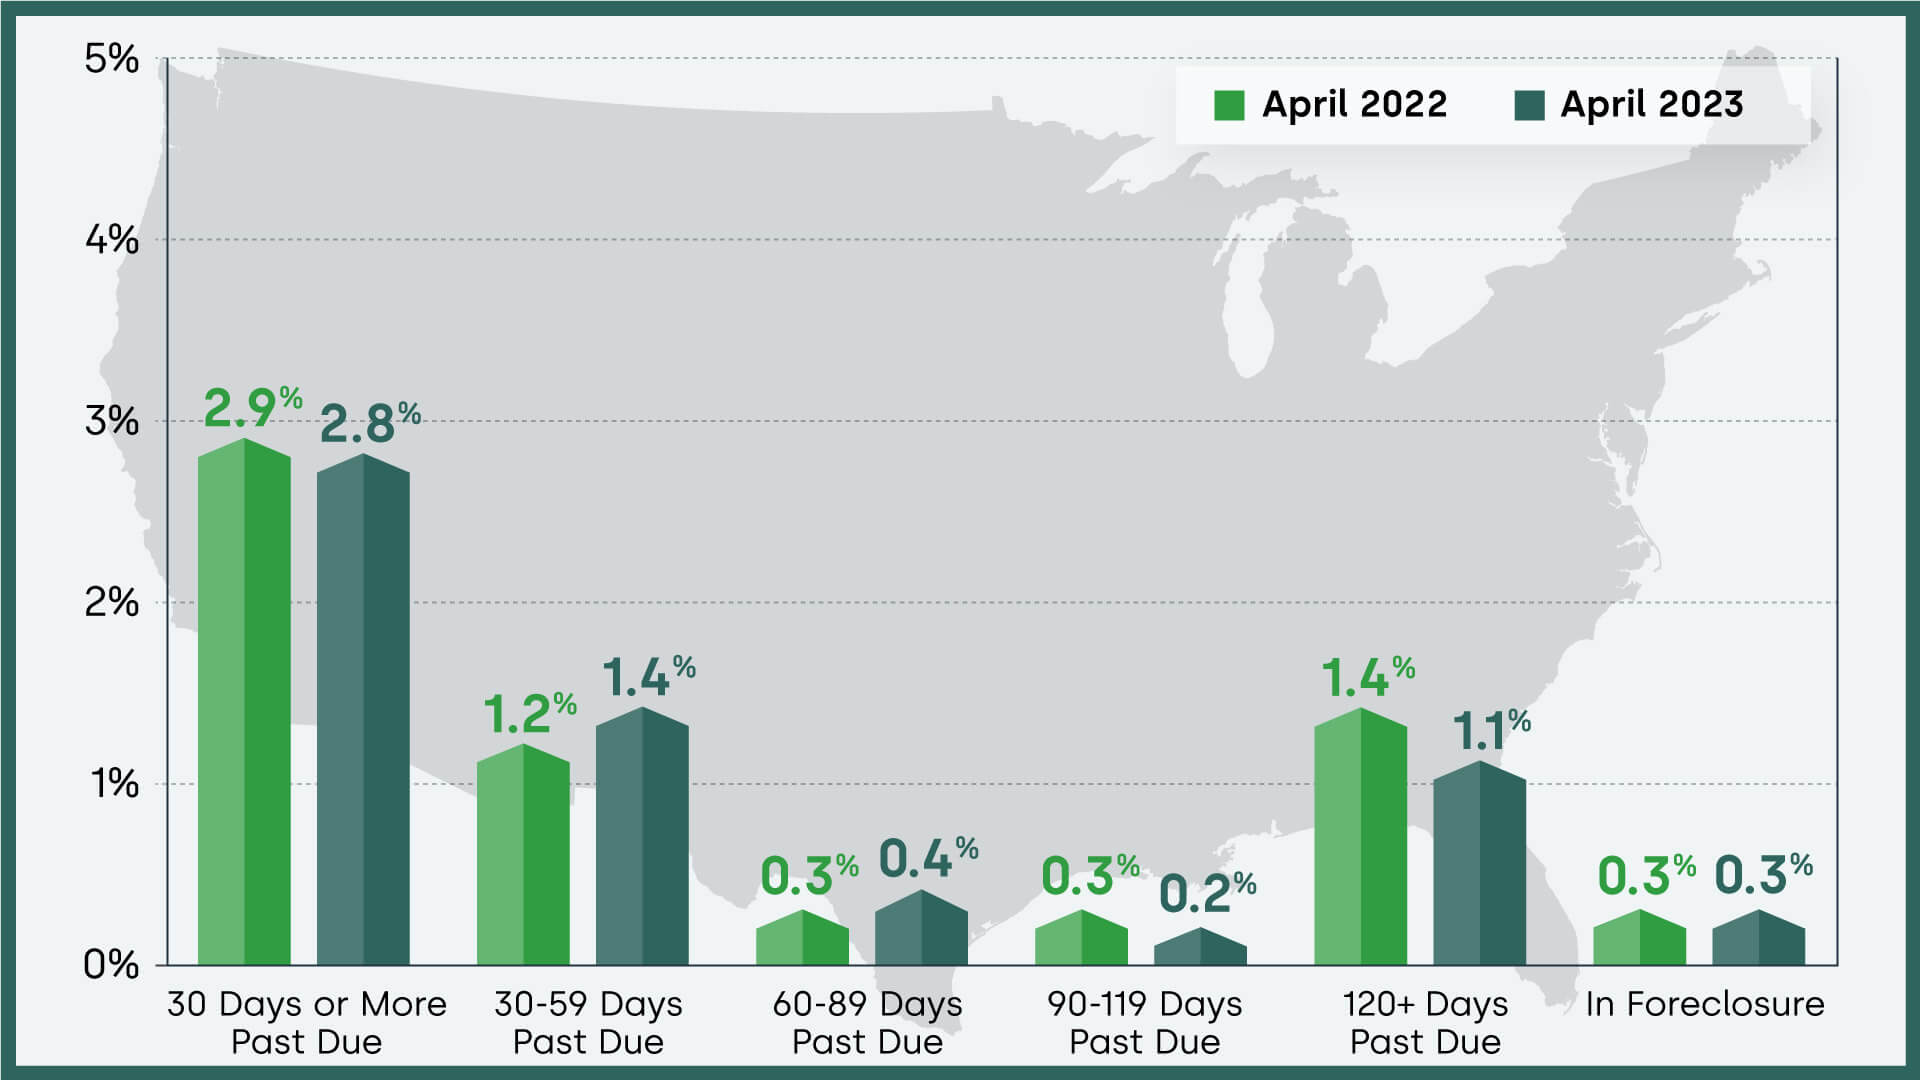 U.S. mortgage delinquency rates by time period, April 2023